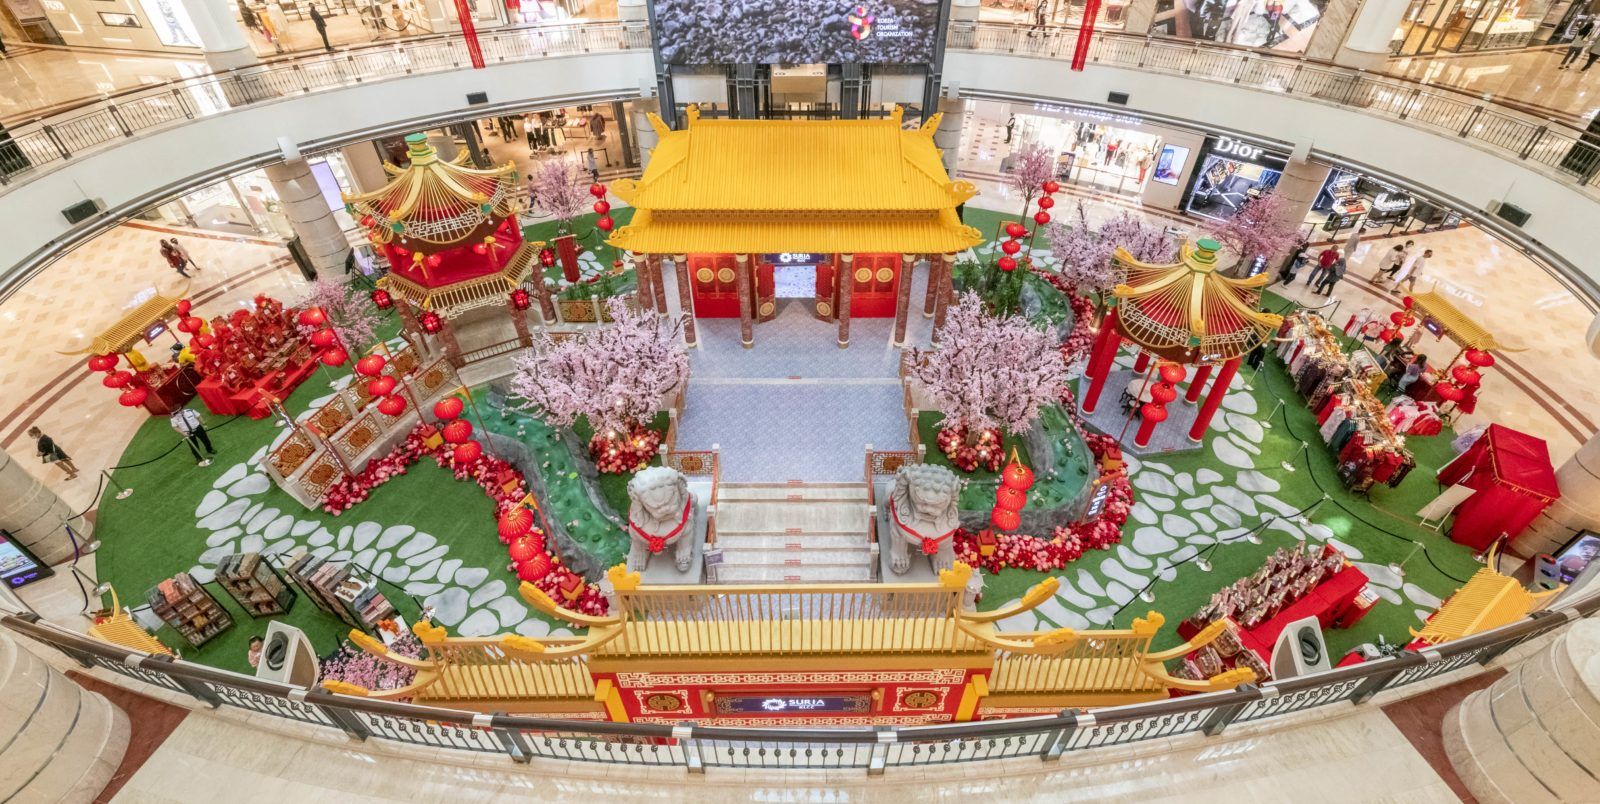 Get transported to an imperial palace at Suria KLCC this Chinese New Year